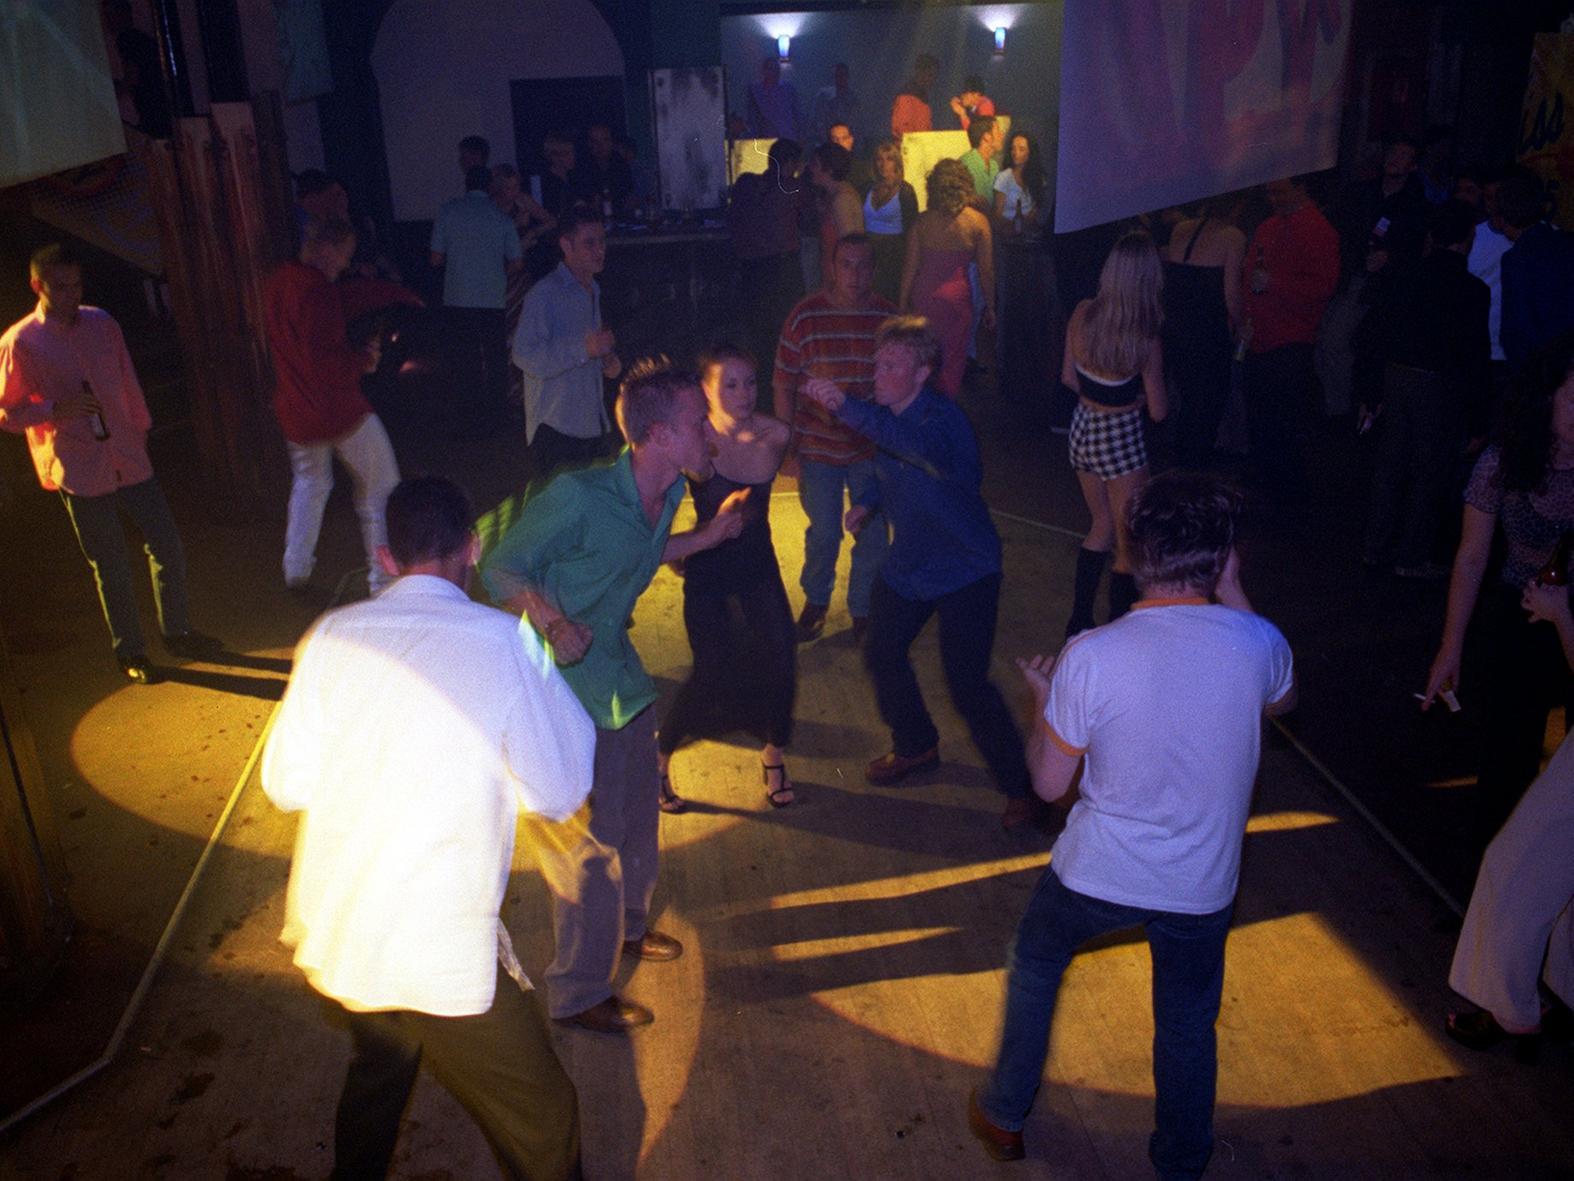 Revellers are cutting some shapes on the dancefloor.